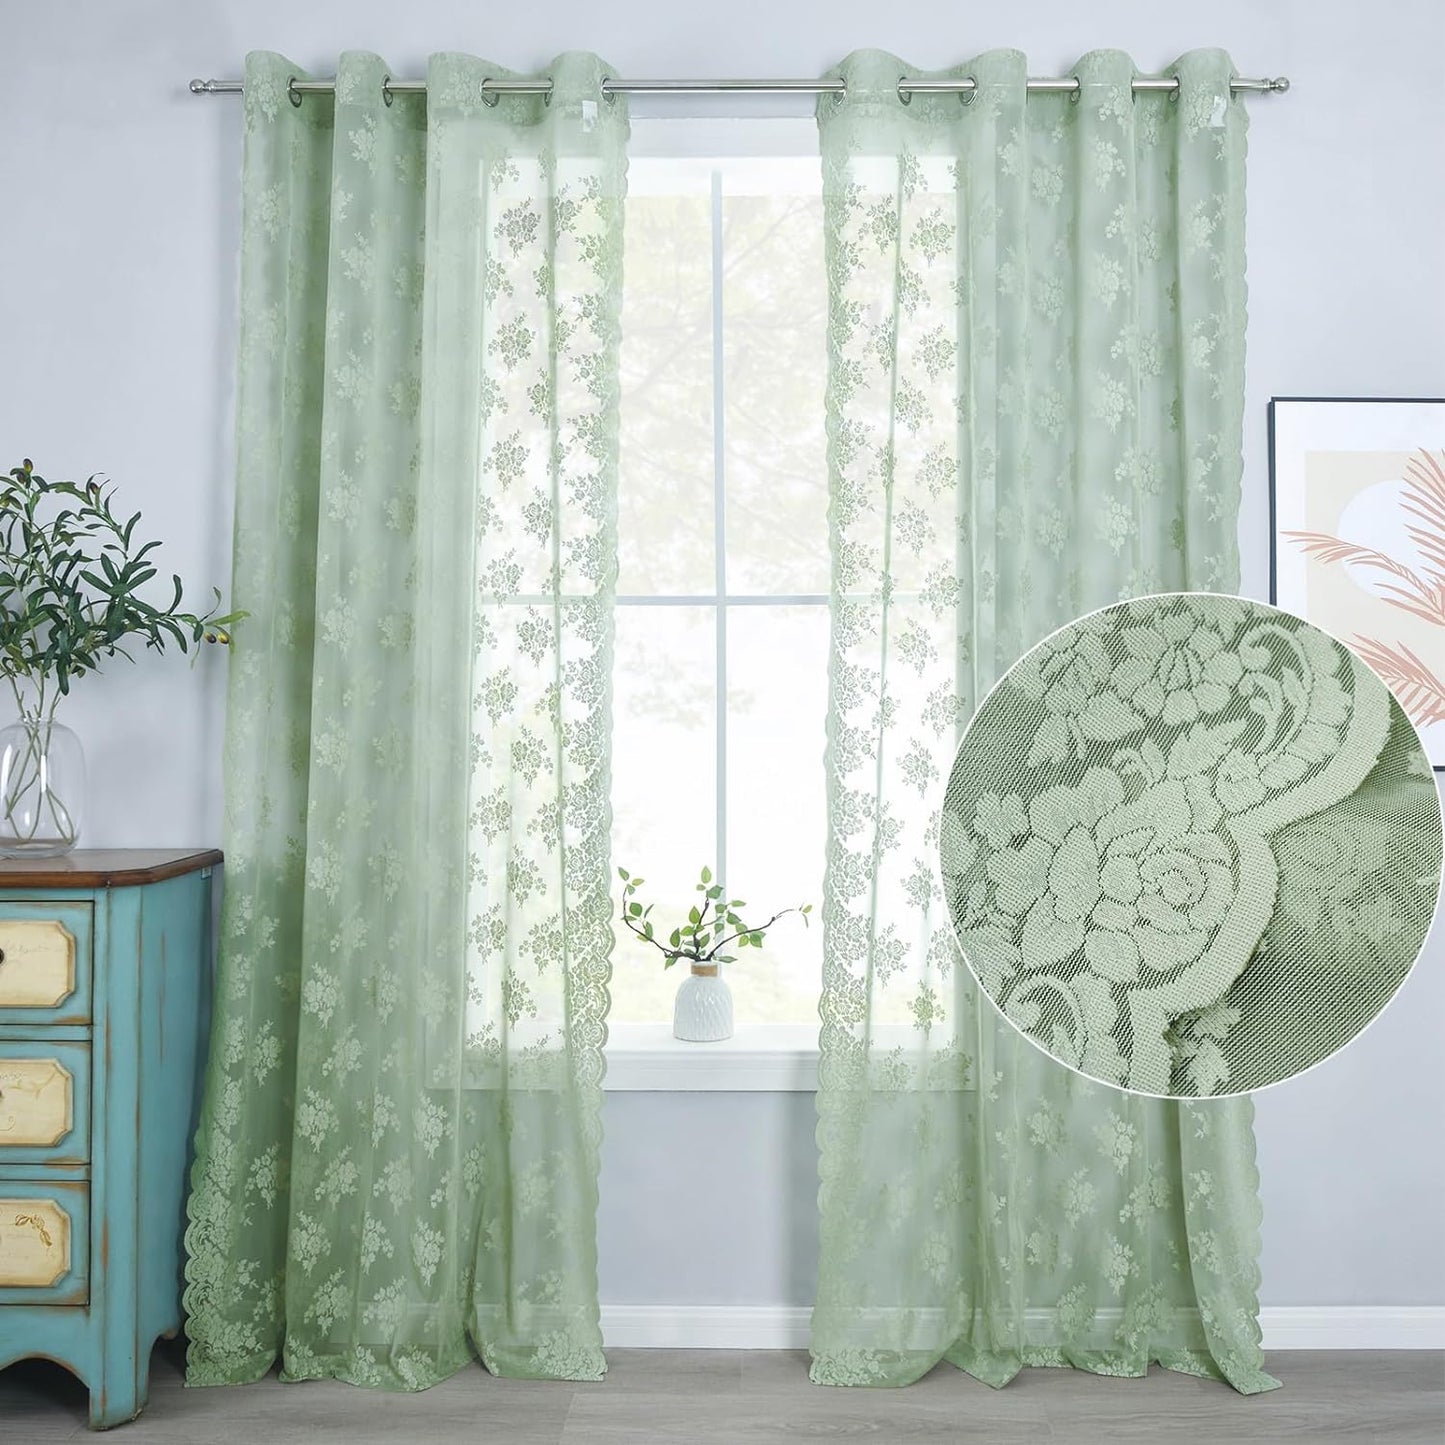 Kotile Sage Green Sheer Valance Curtain for Windows, Rustic Floral Spring Sheer Window Valance Curtain 18 Inch Length, Light Filtering Rod Pocket Lace Valance, 52 X 18 Inch, 1 Panel, Sage Green  Kotile Textile Sage Green 52 In X 63 In Grommet 